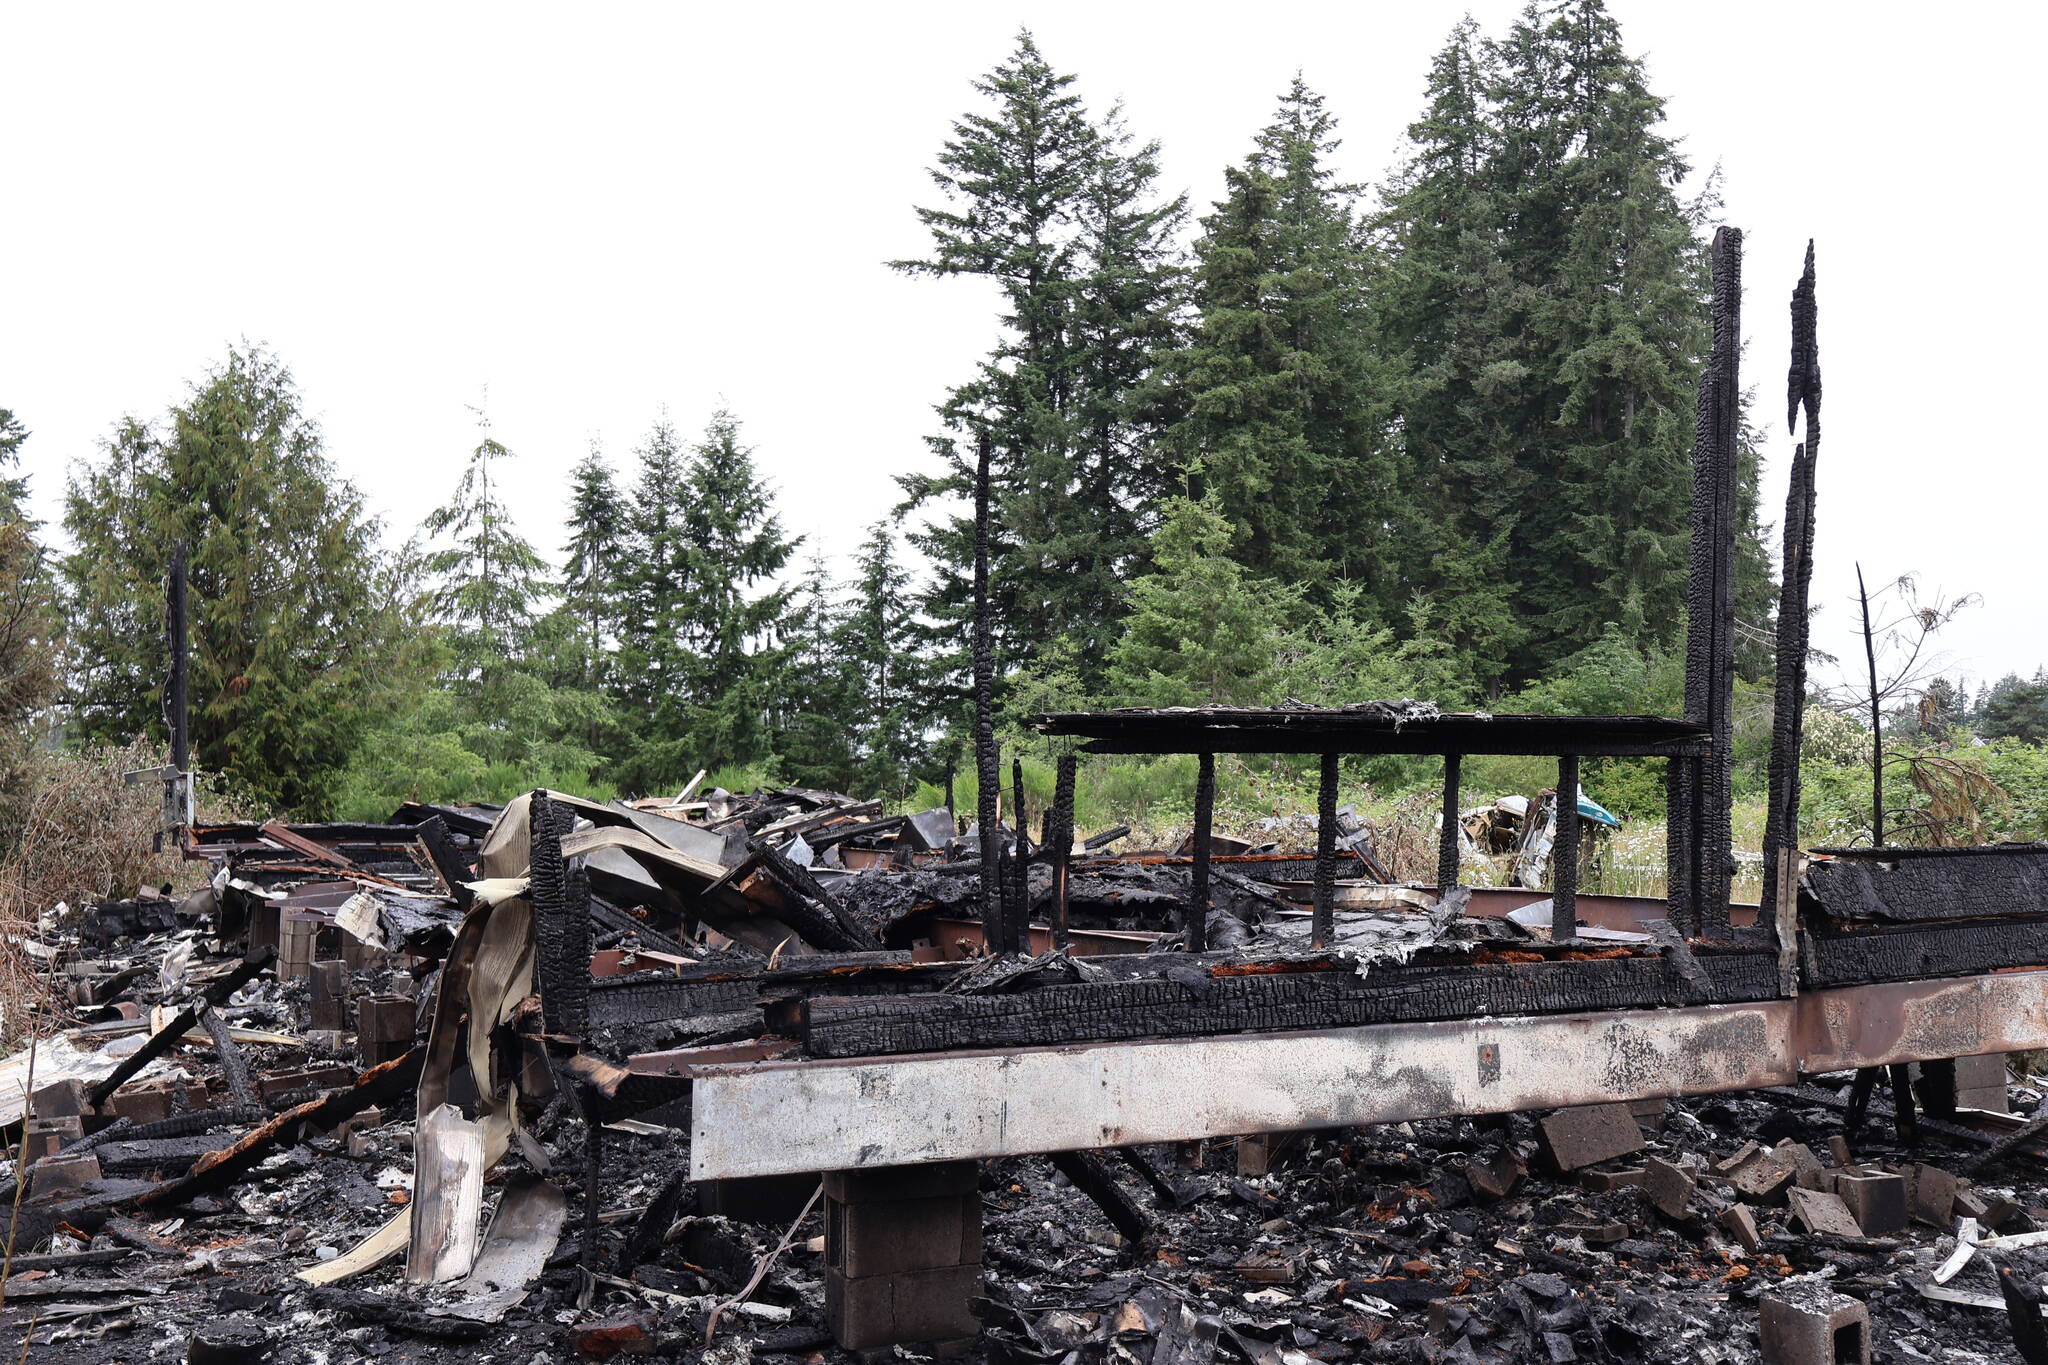 A residential trailer in Elma was completely destroyed by a fire on Tuesday. (Michael S. Lockett / The Daily World)